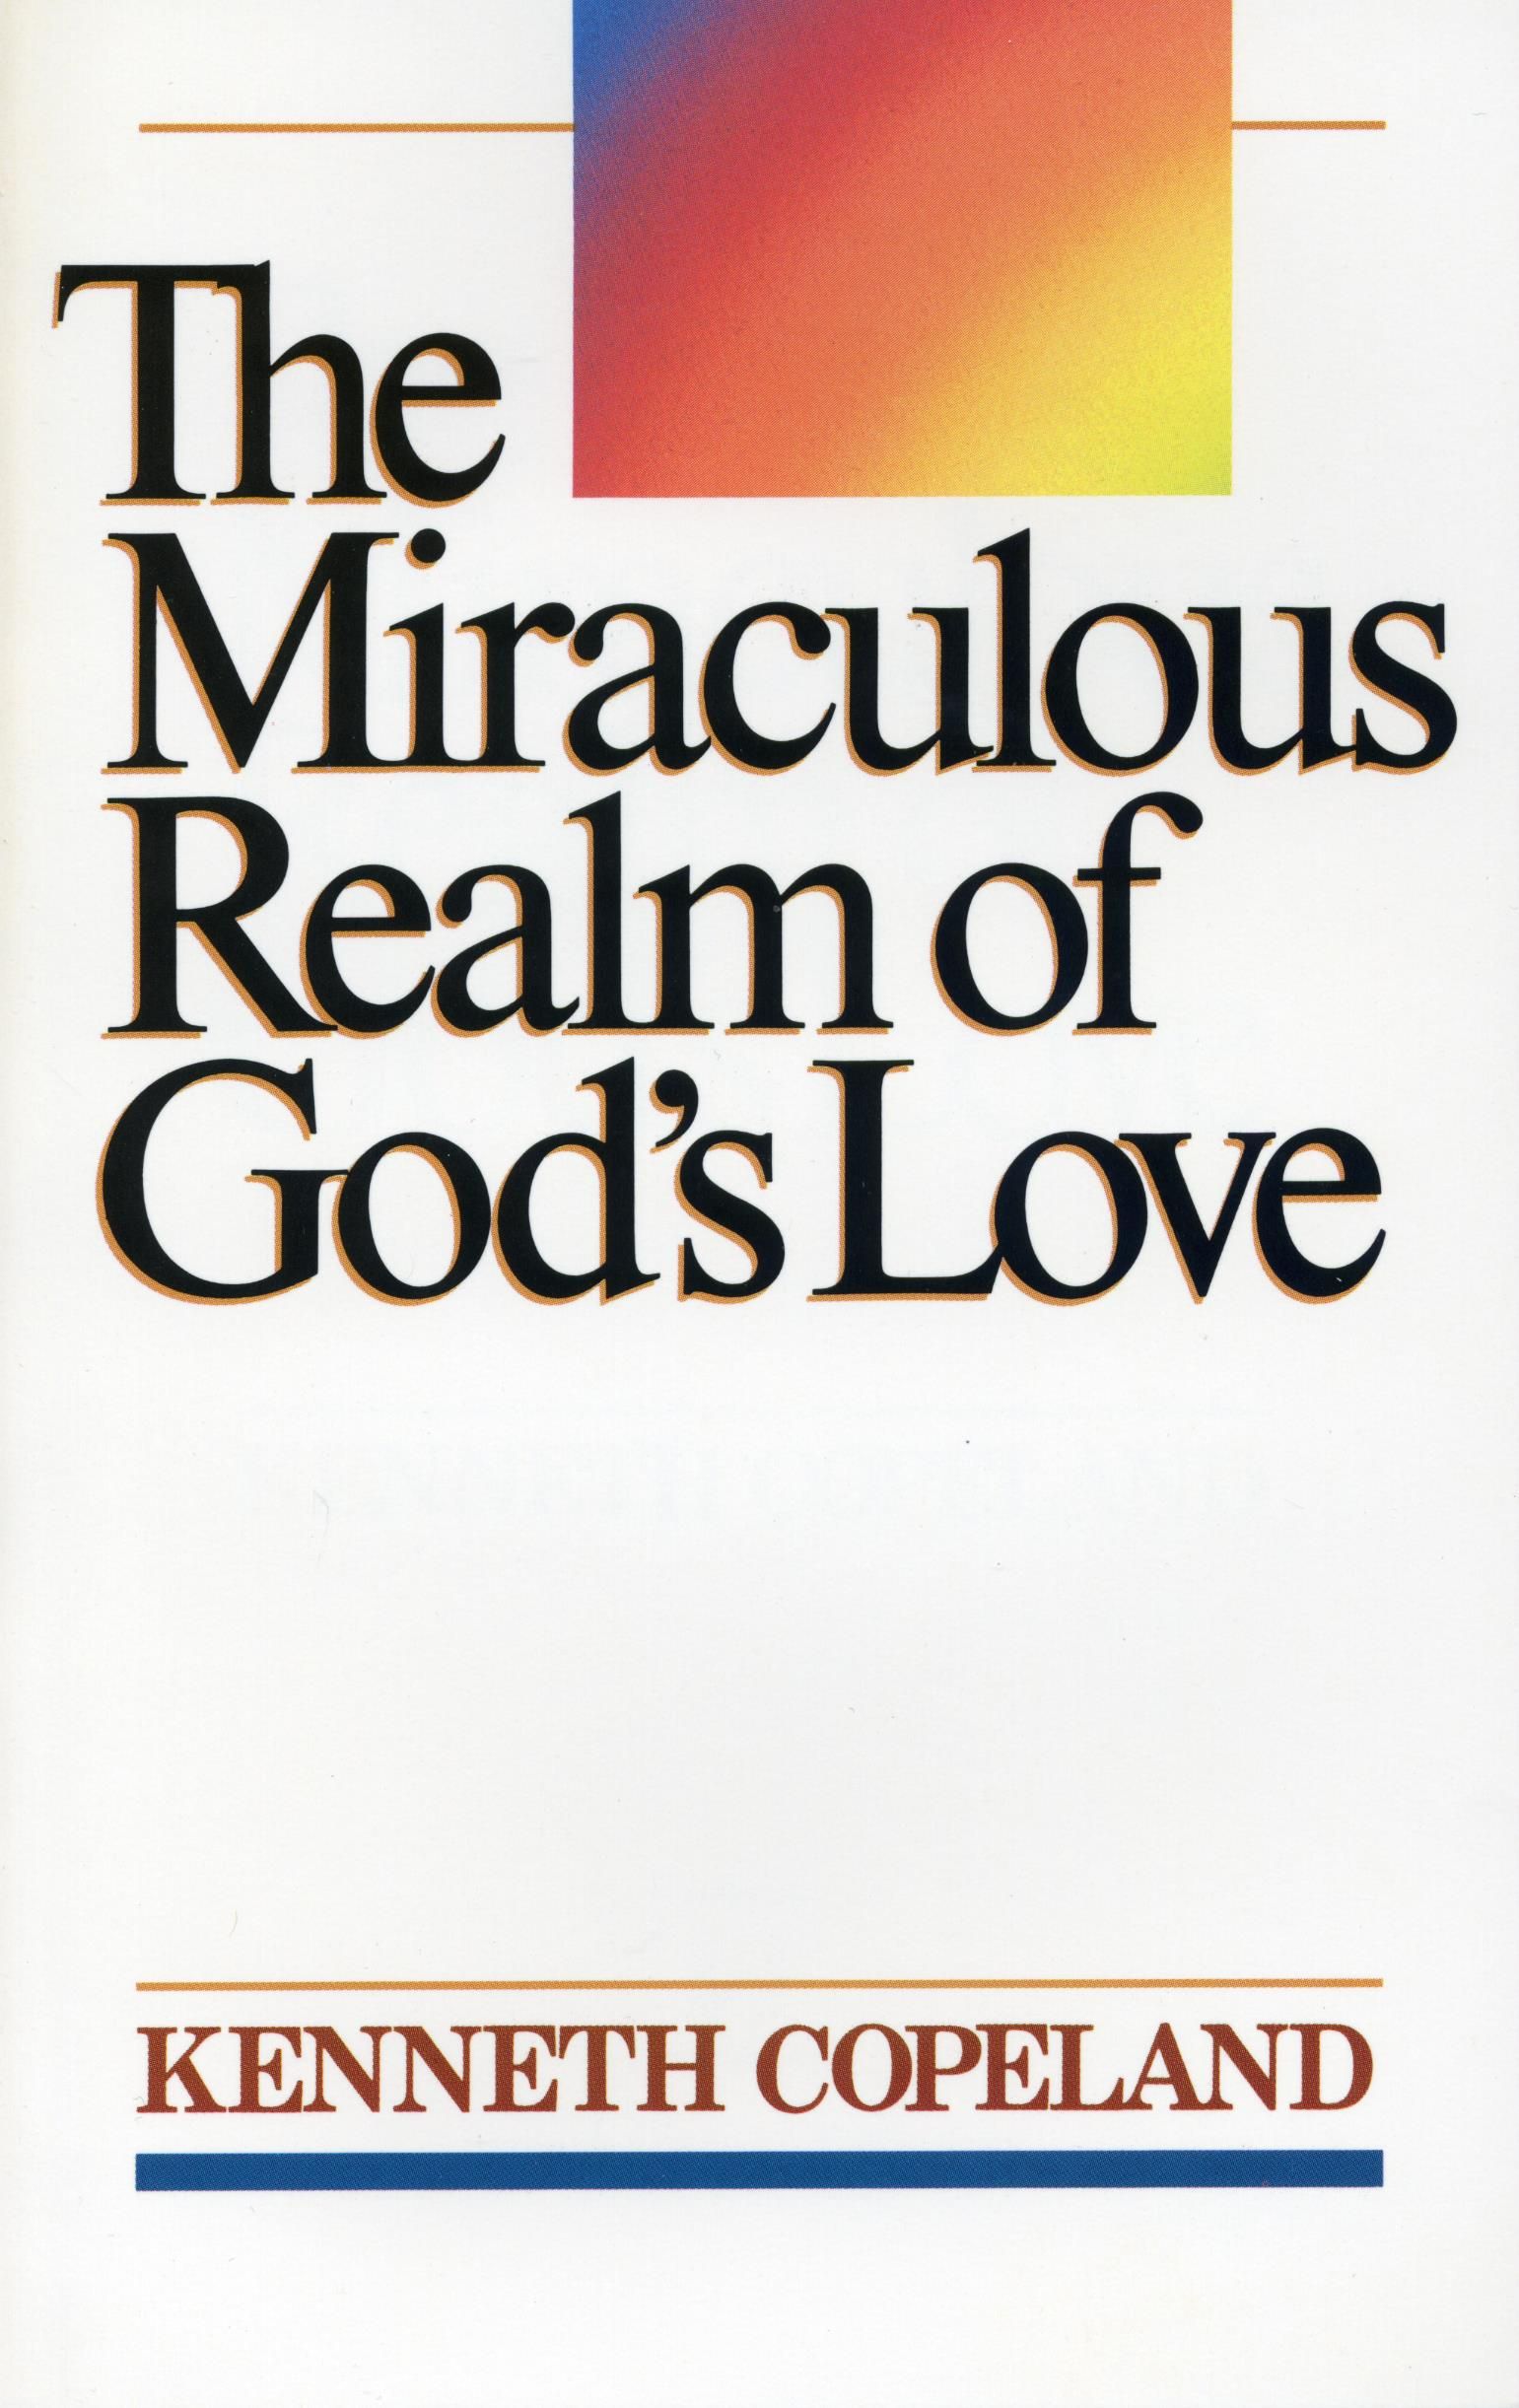 K. Copeland: The Miracelous Realm of God's Love